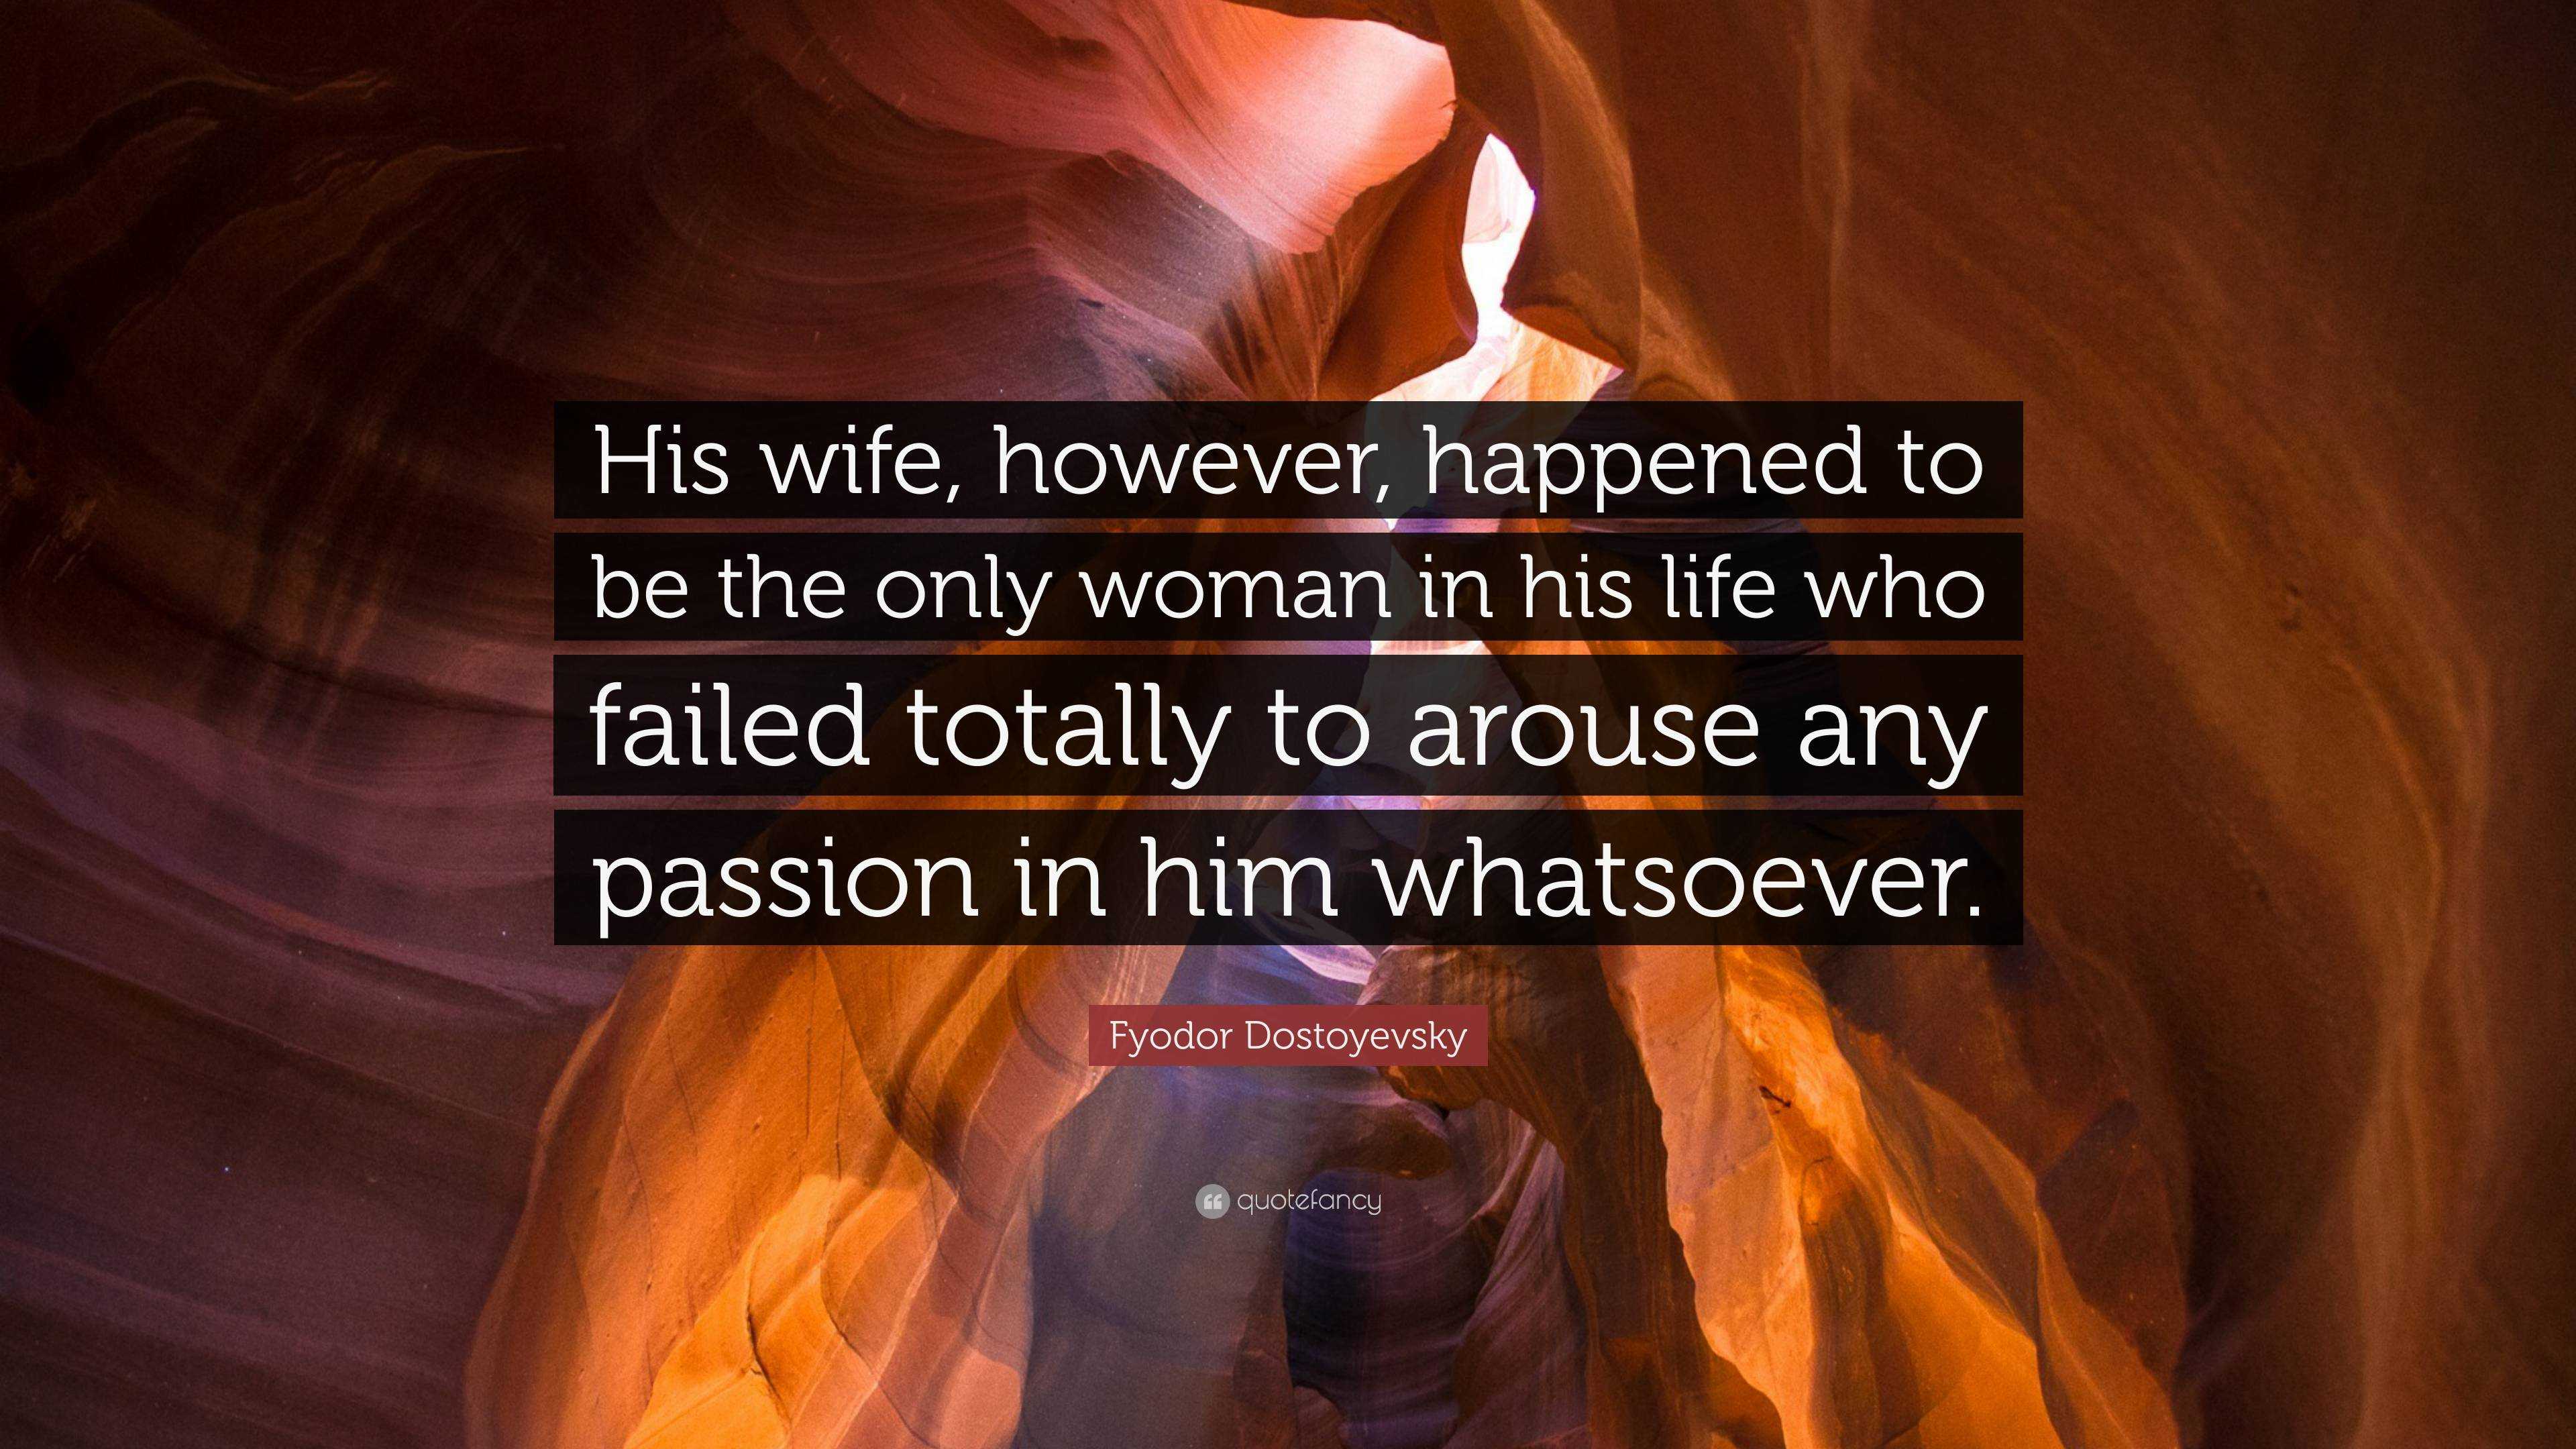 Fyodor Dostoyevsky Quote: “His wife, however, happened to be the only ...